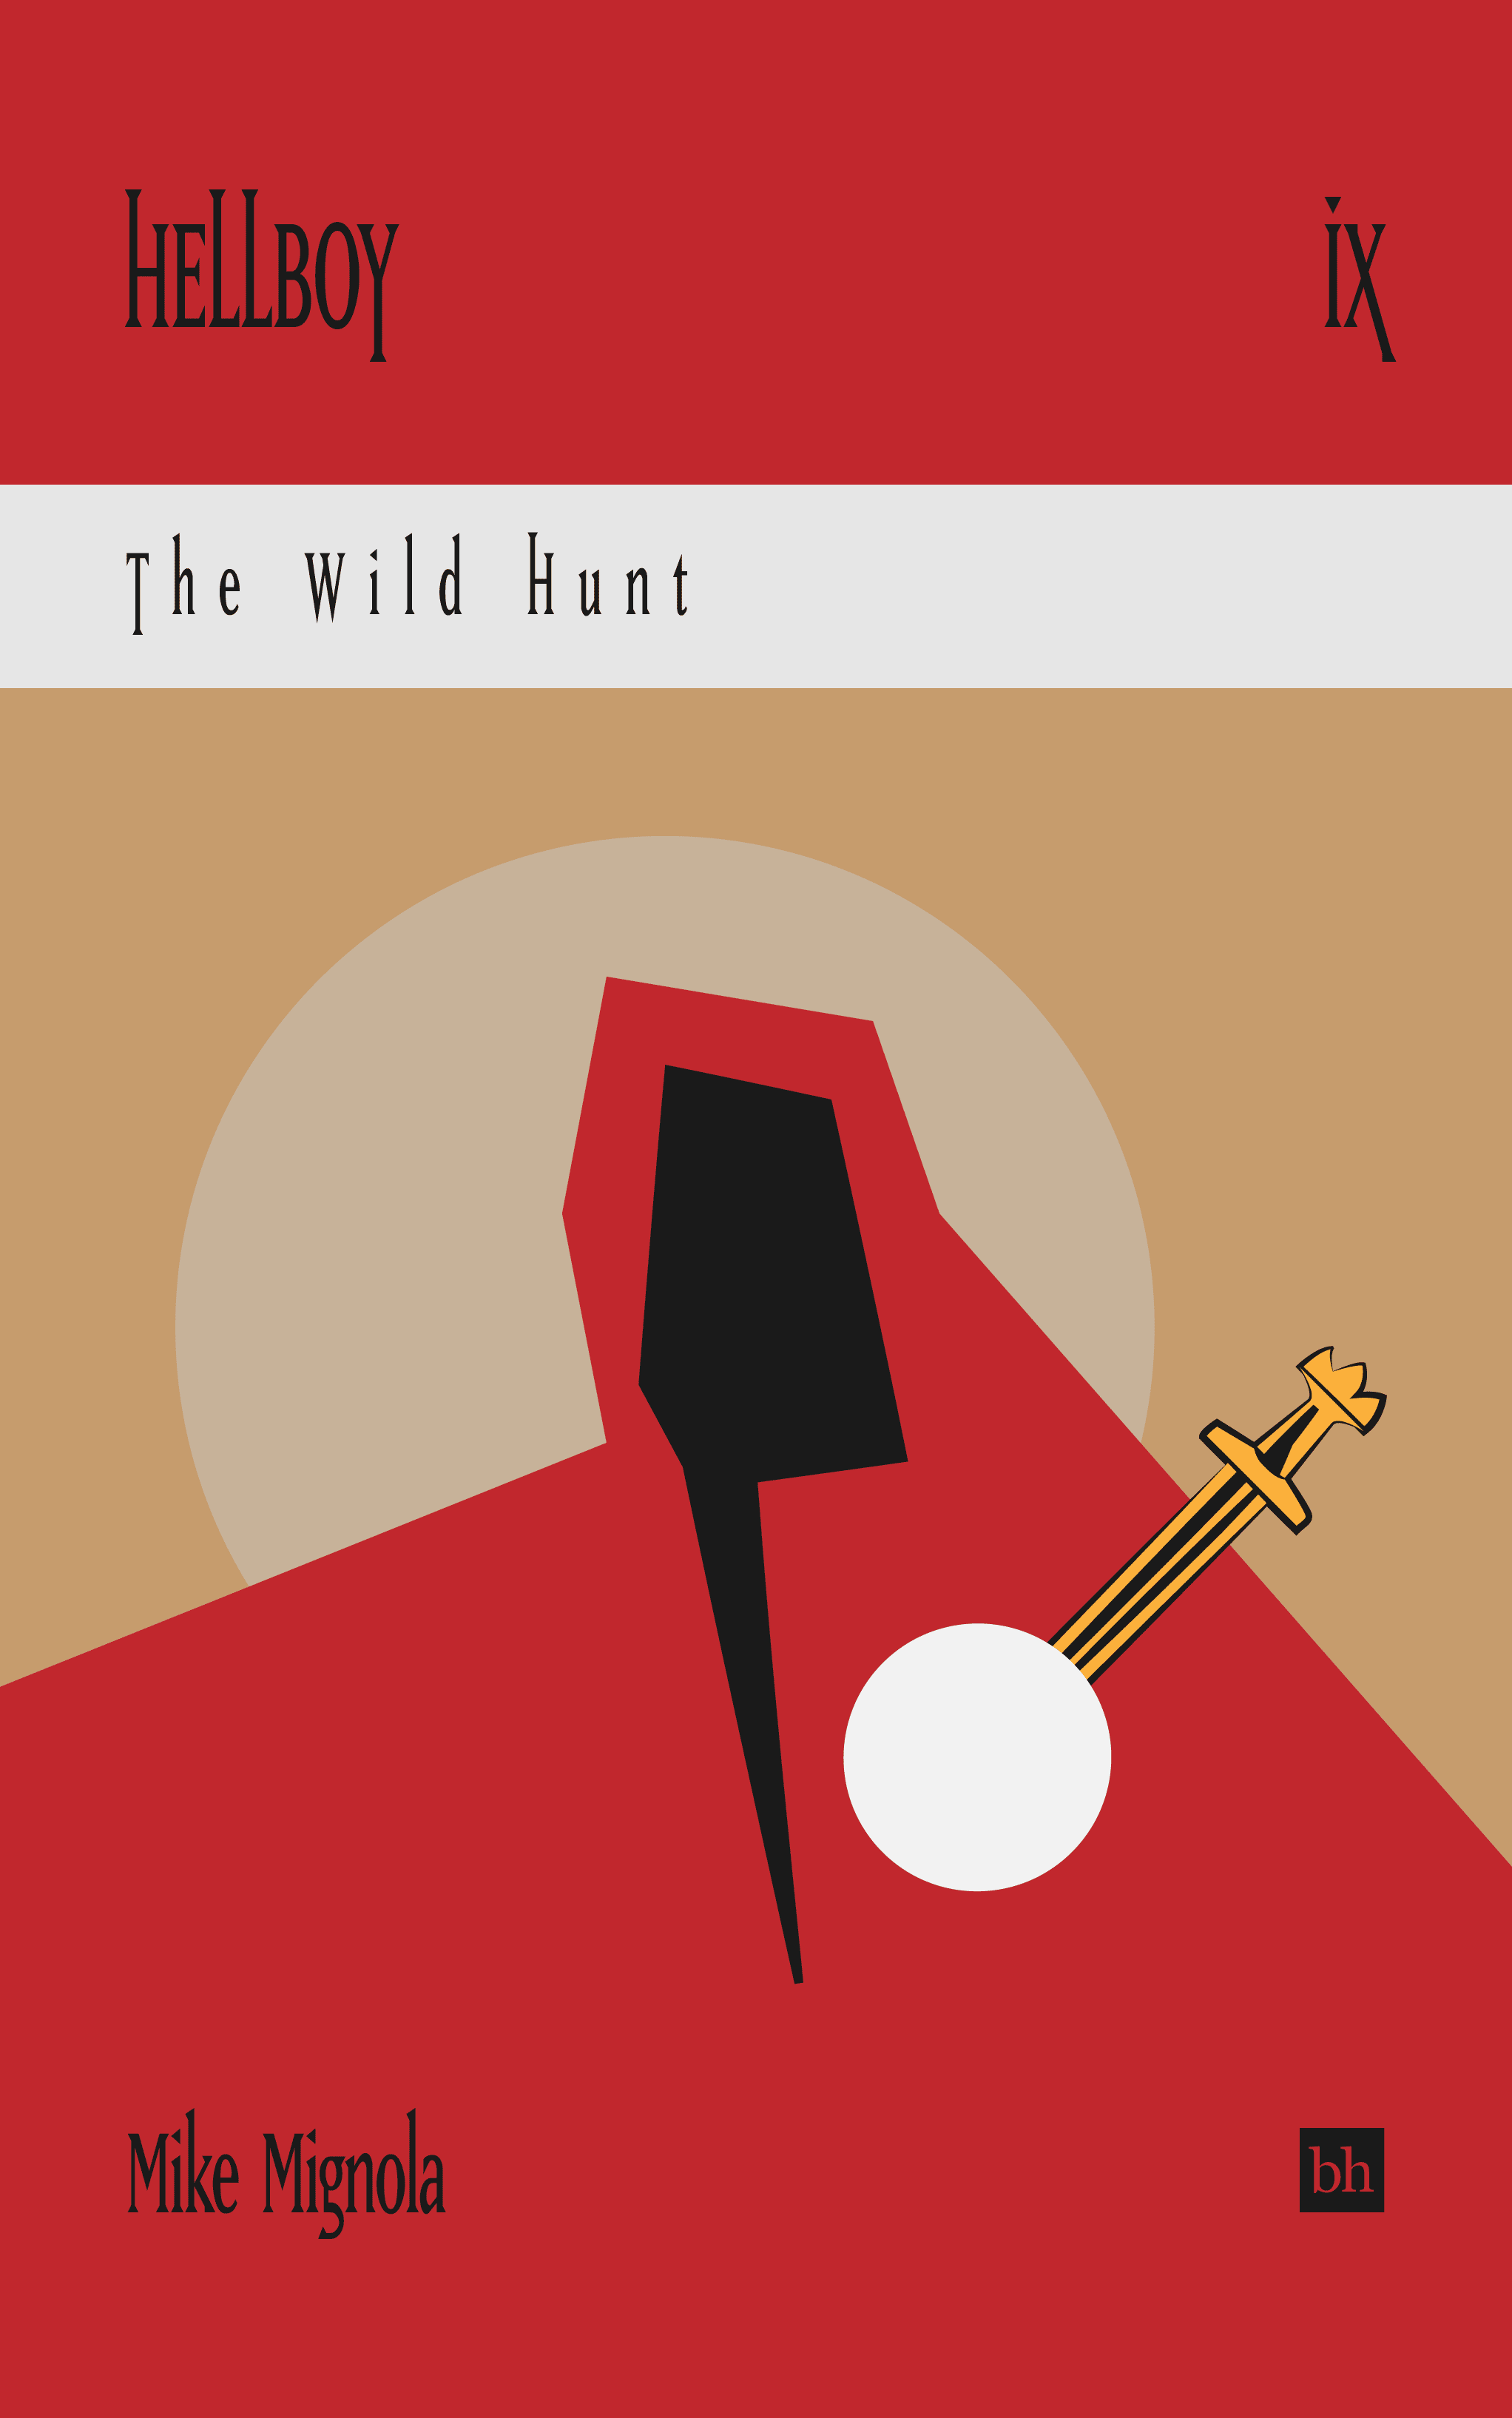 Book cover mock thumbnail for Hellboy: The Wild Hunt